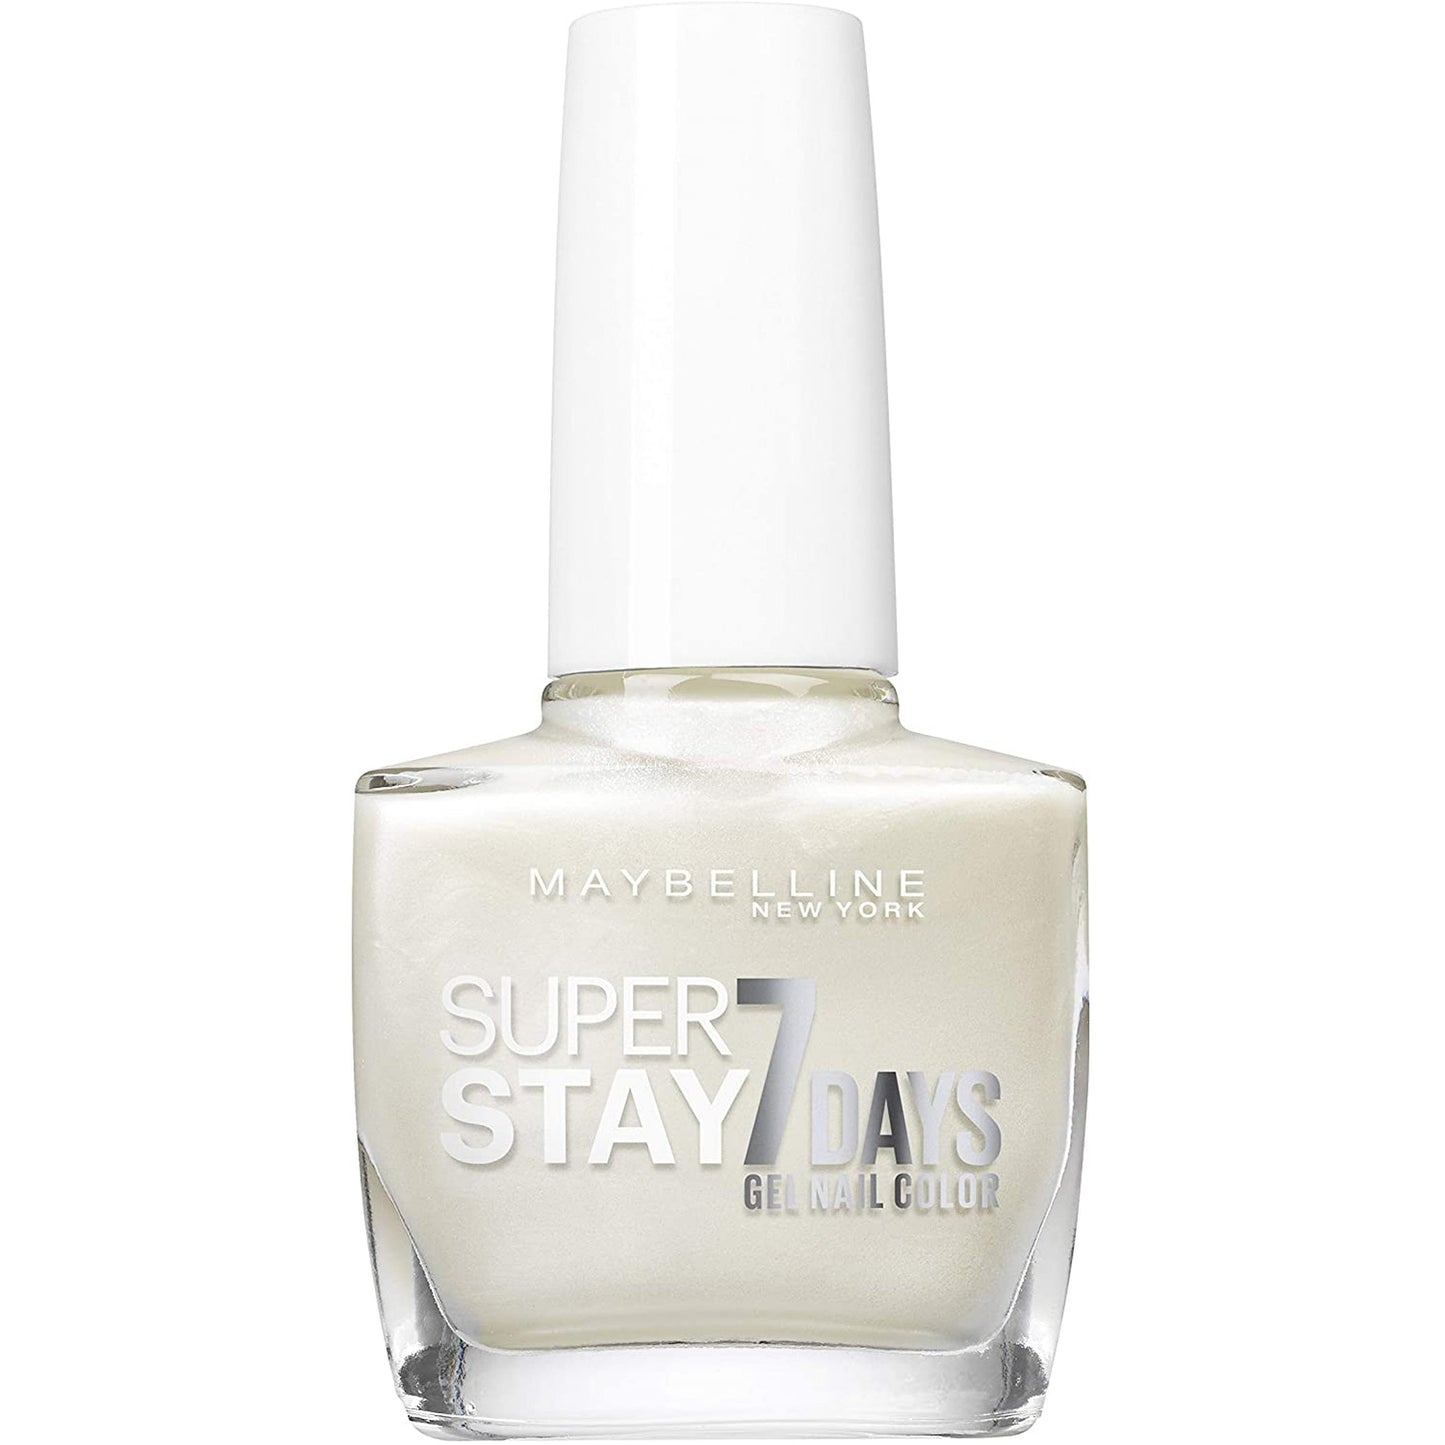 Maybelline Polish Stay Nail Gel – 7 Days Super White Pearly 77